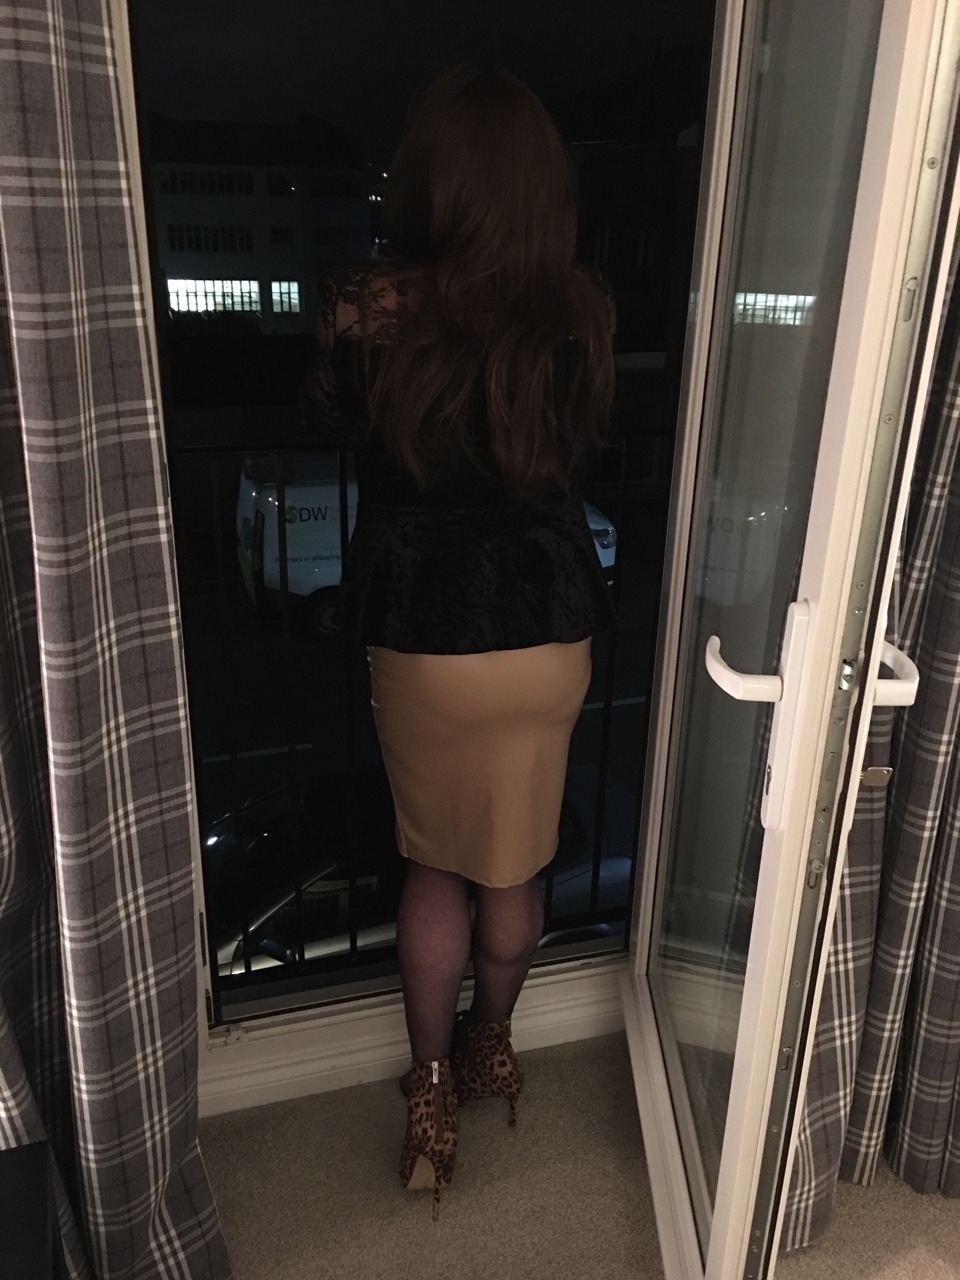 mymmmmasquerade: heels-stockingsforme: Does my bum look sexy in this skirt? X  Check